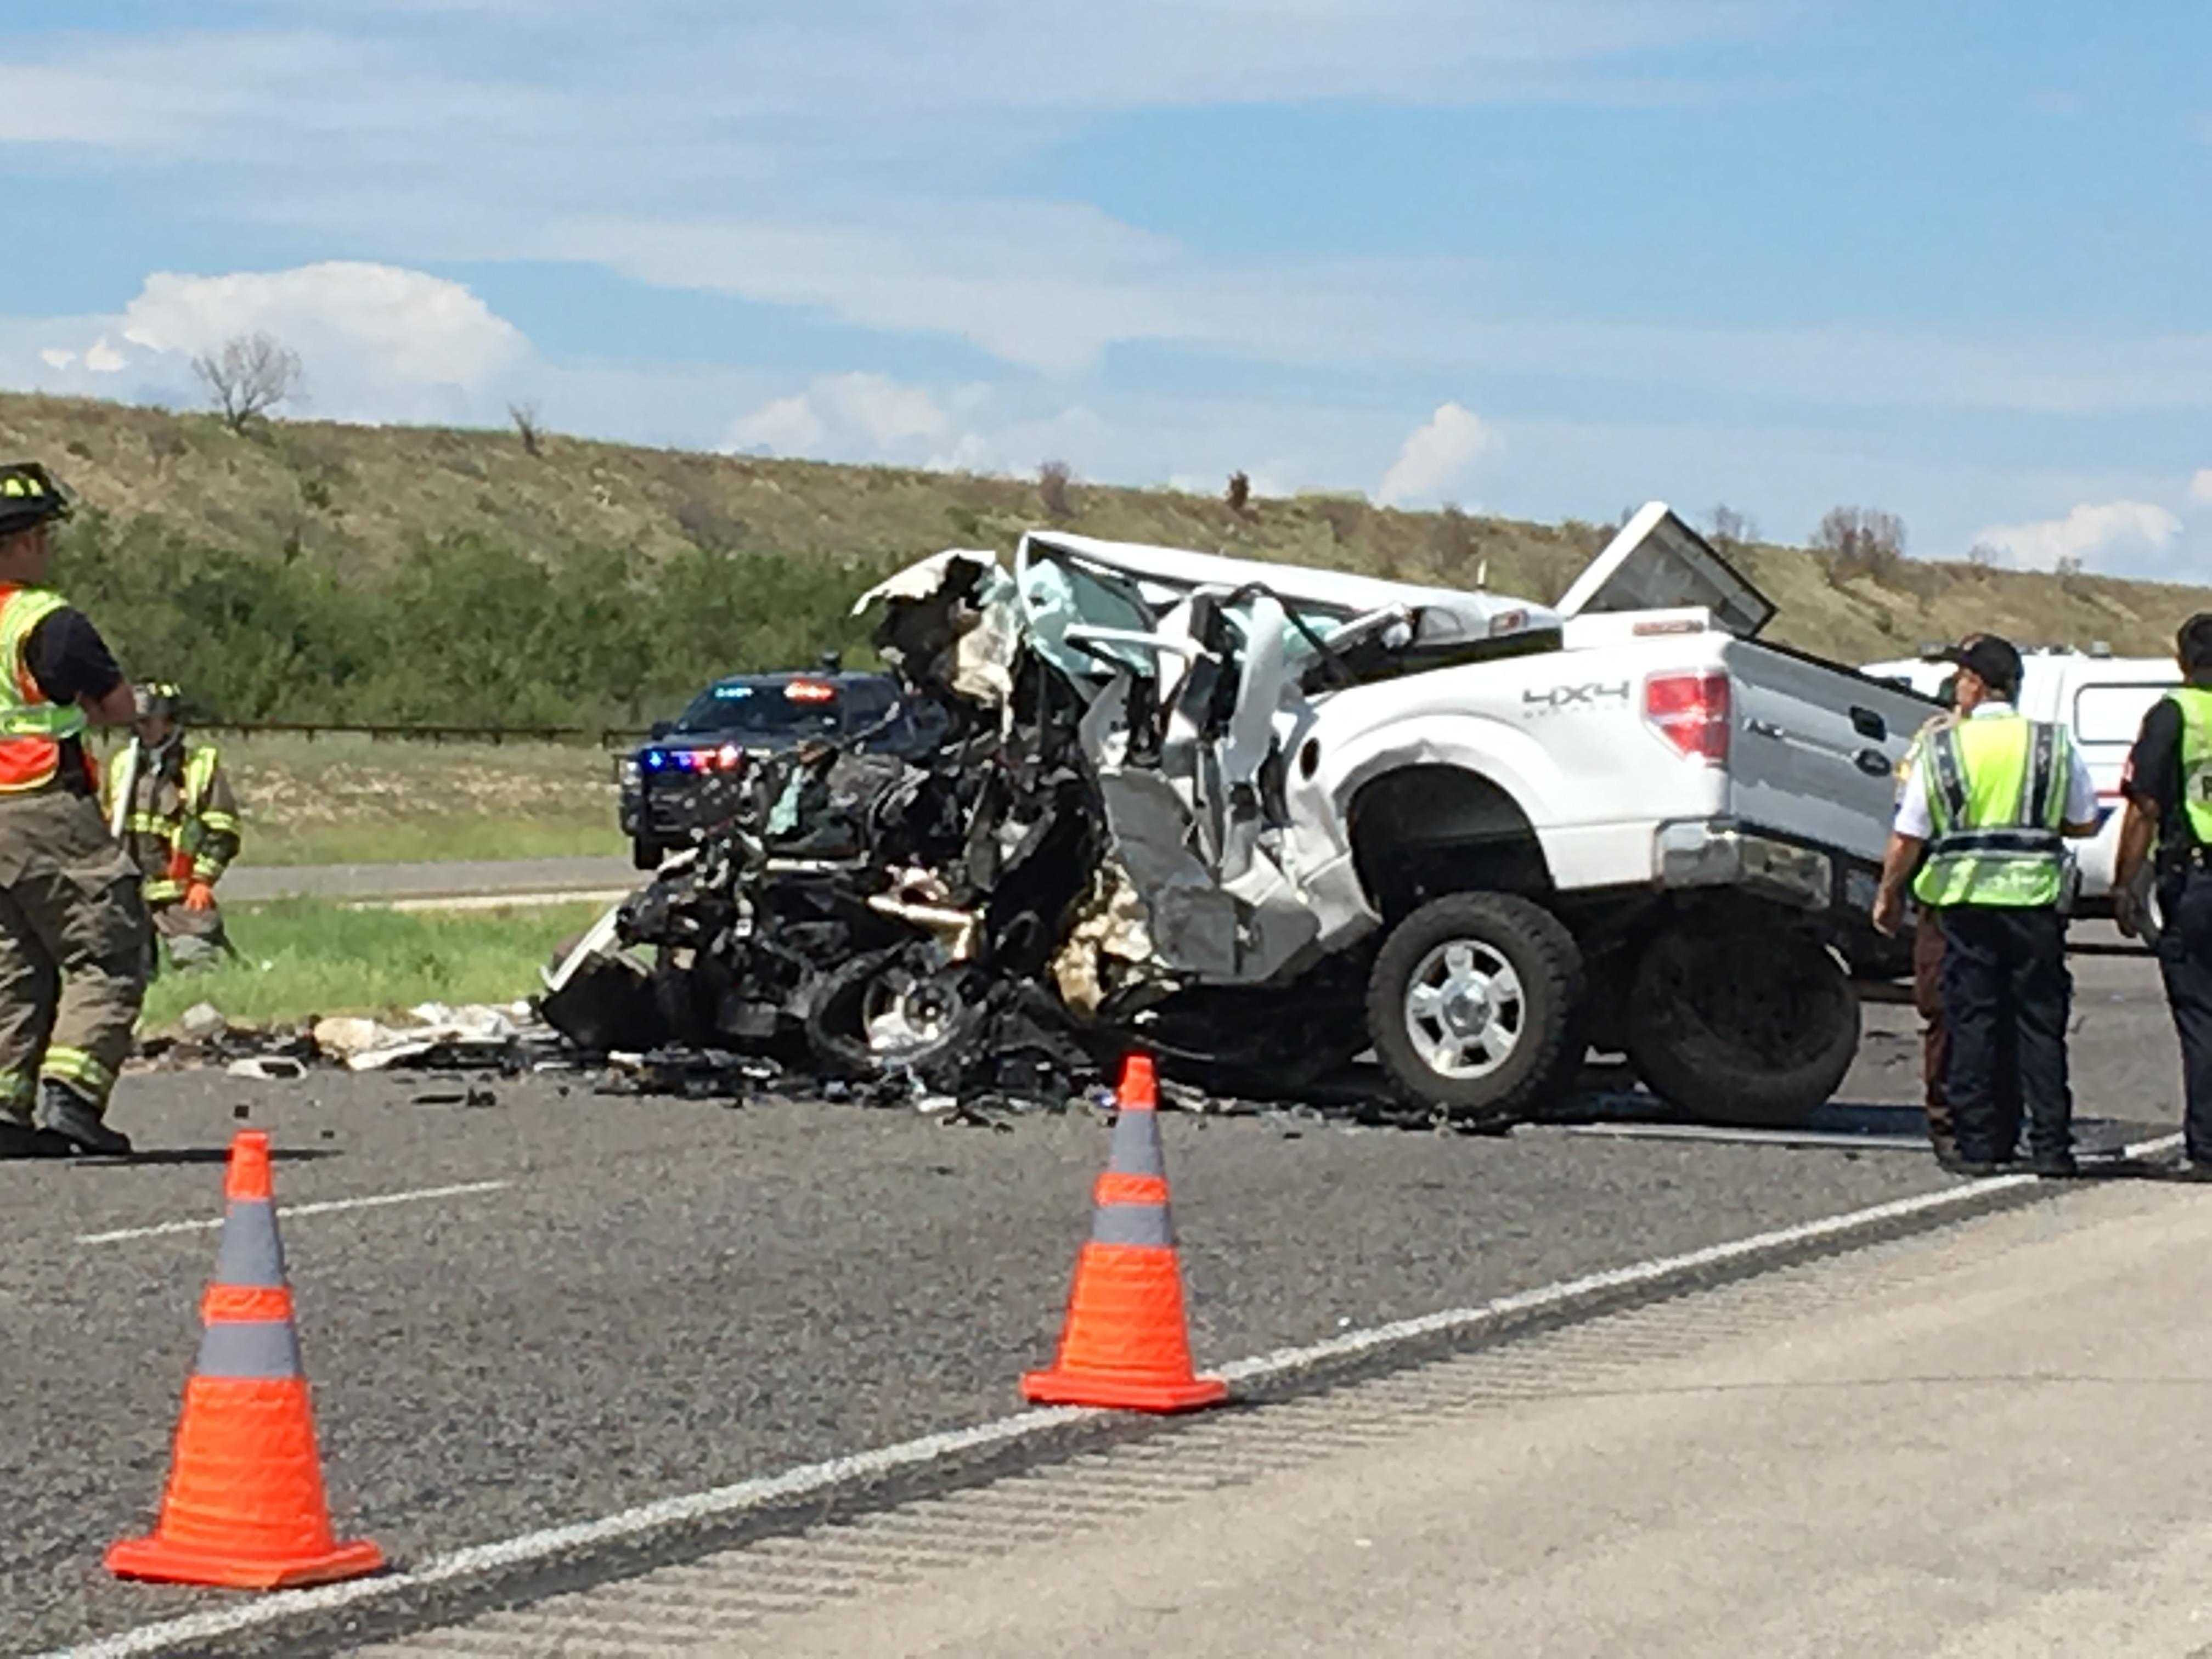 SAPD Officials Continue to Investigate Today's Deadly Crash